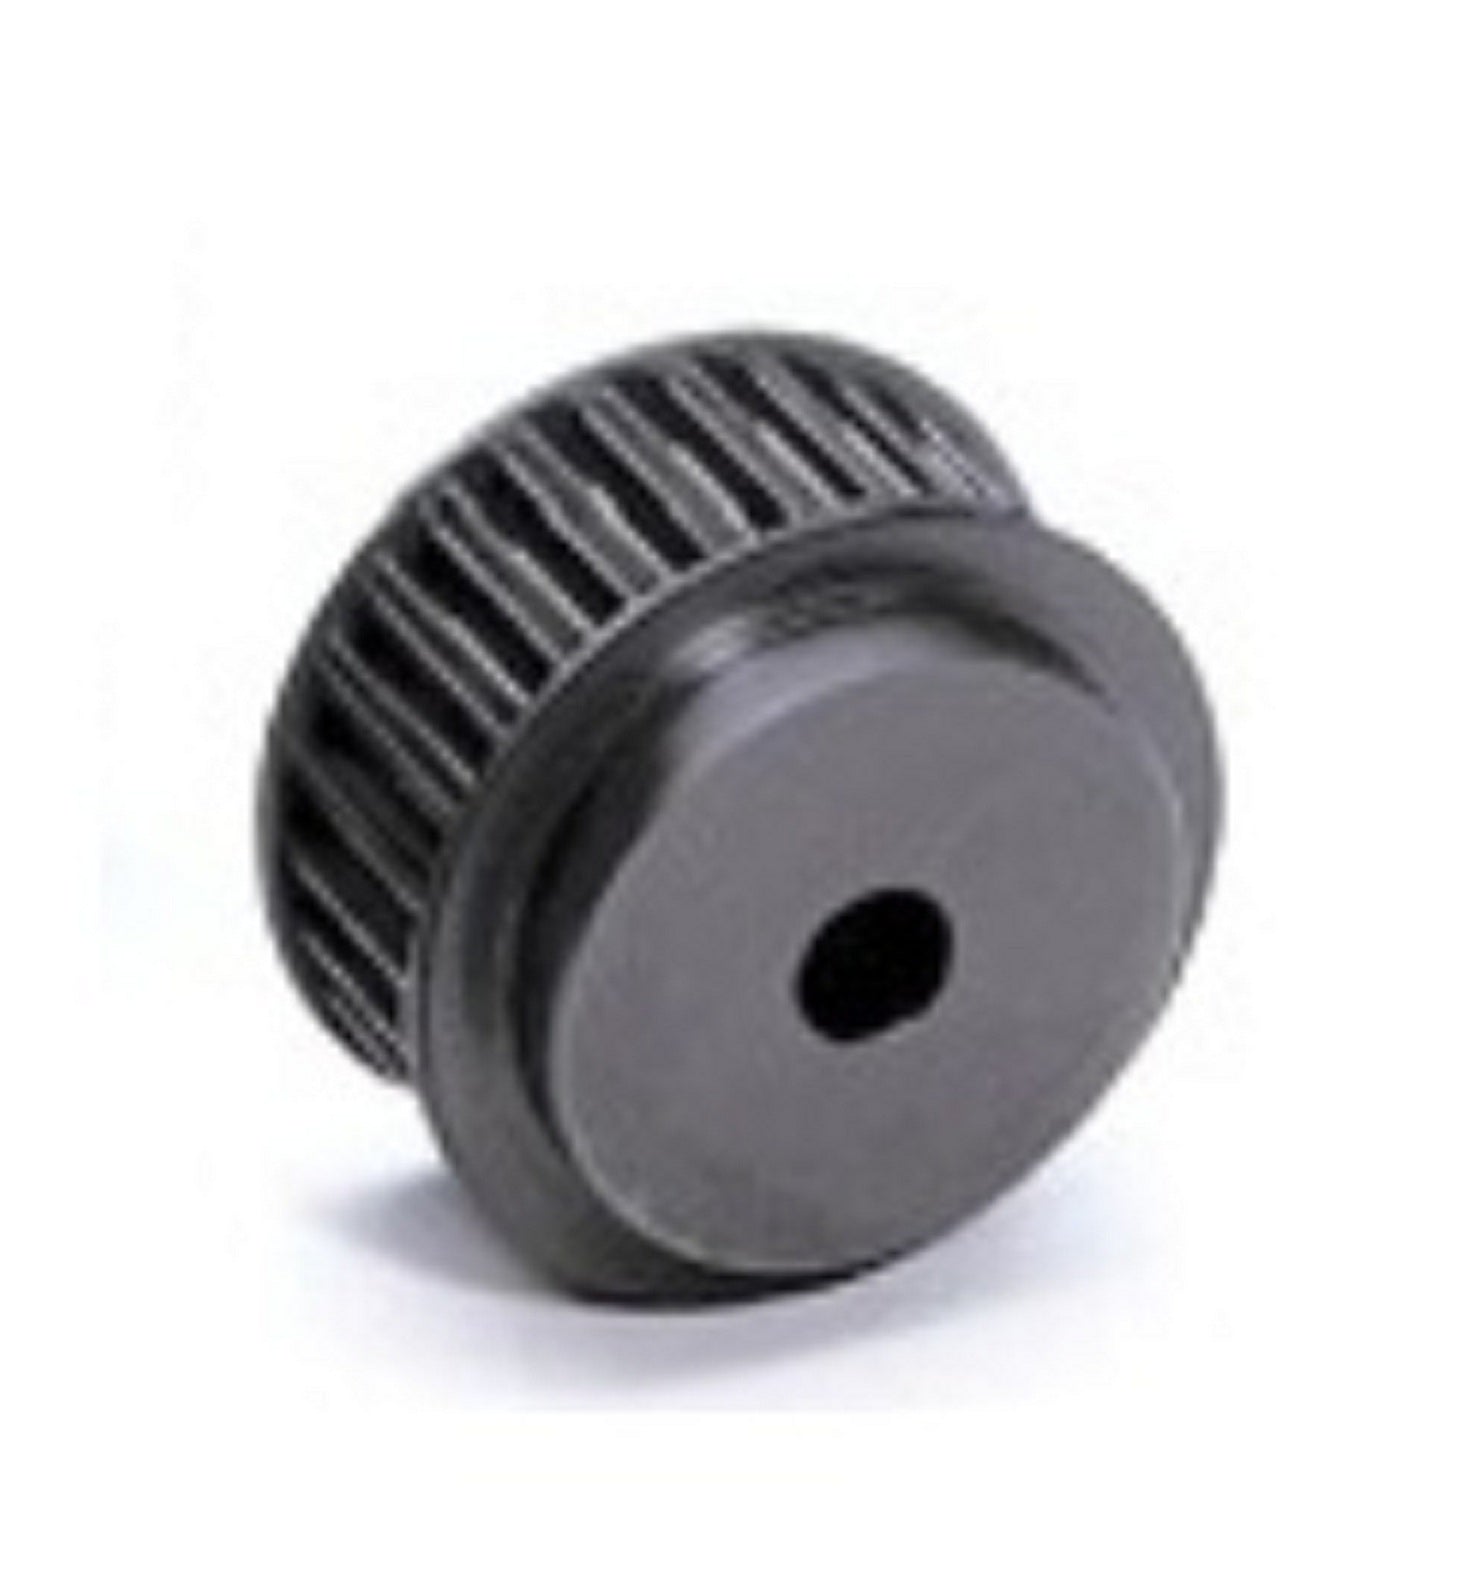 25-8M-30 Steel Timing Pulley 25 tooth MPB